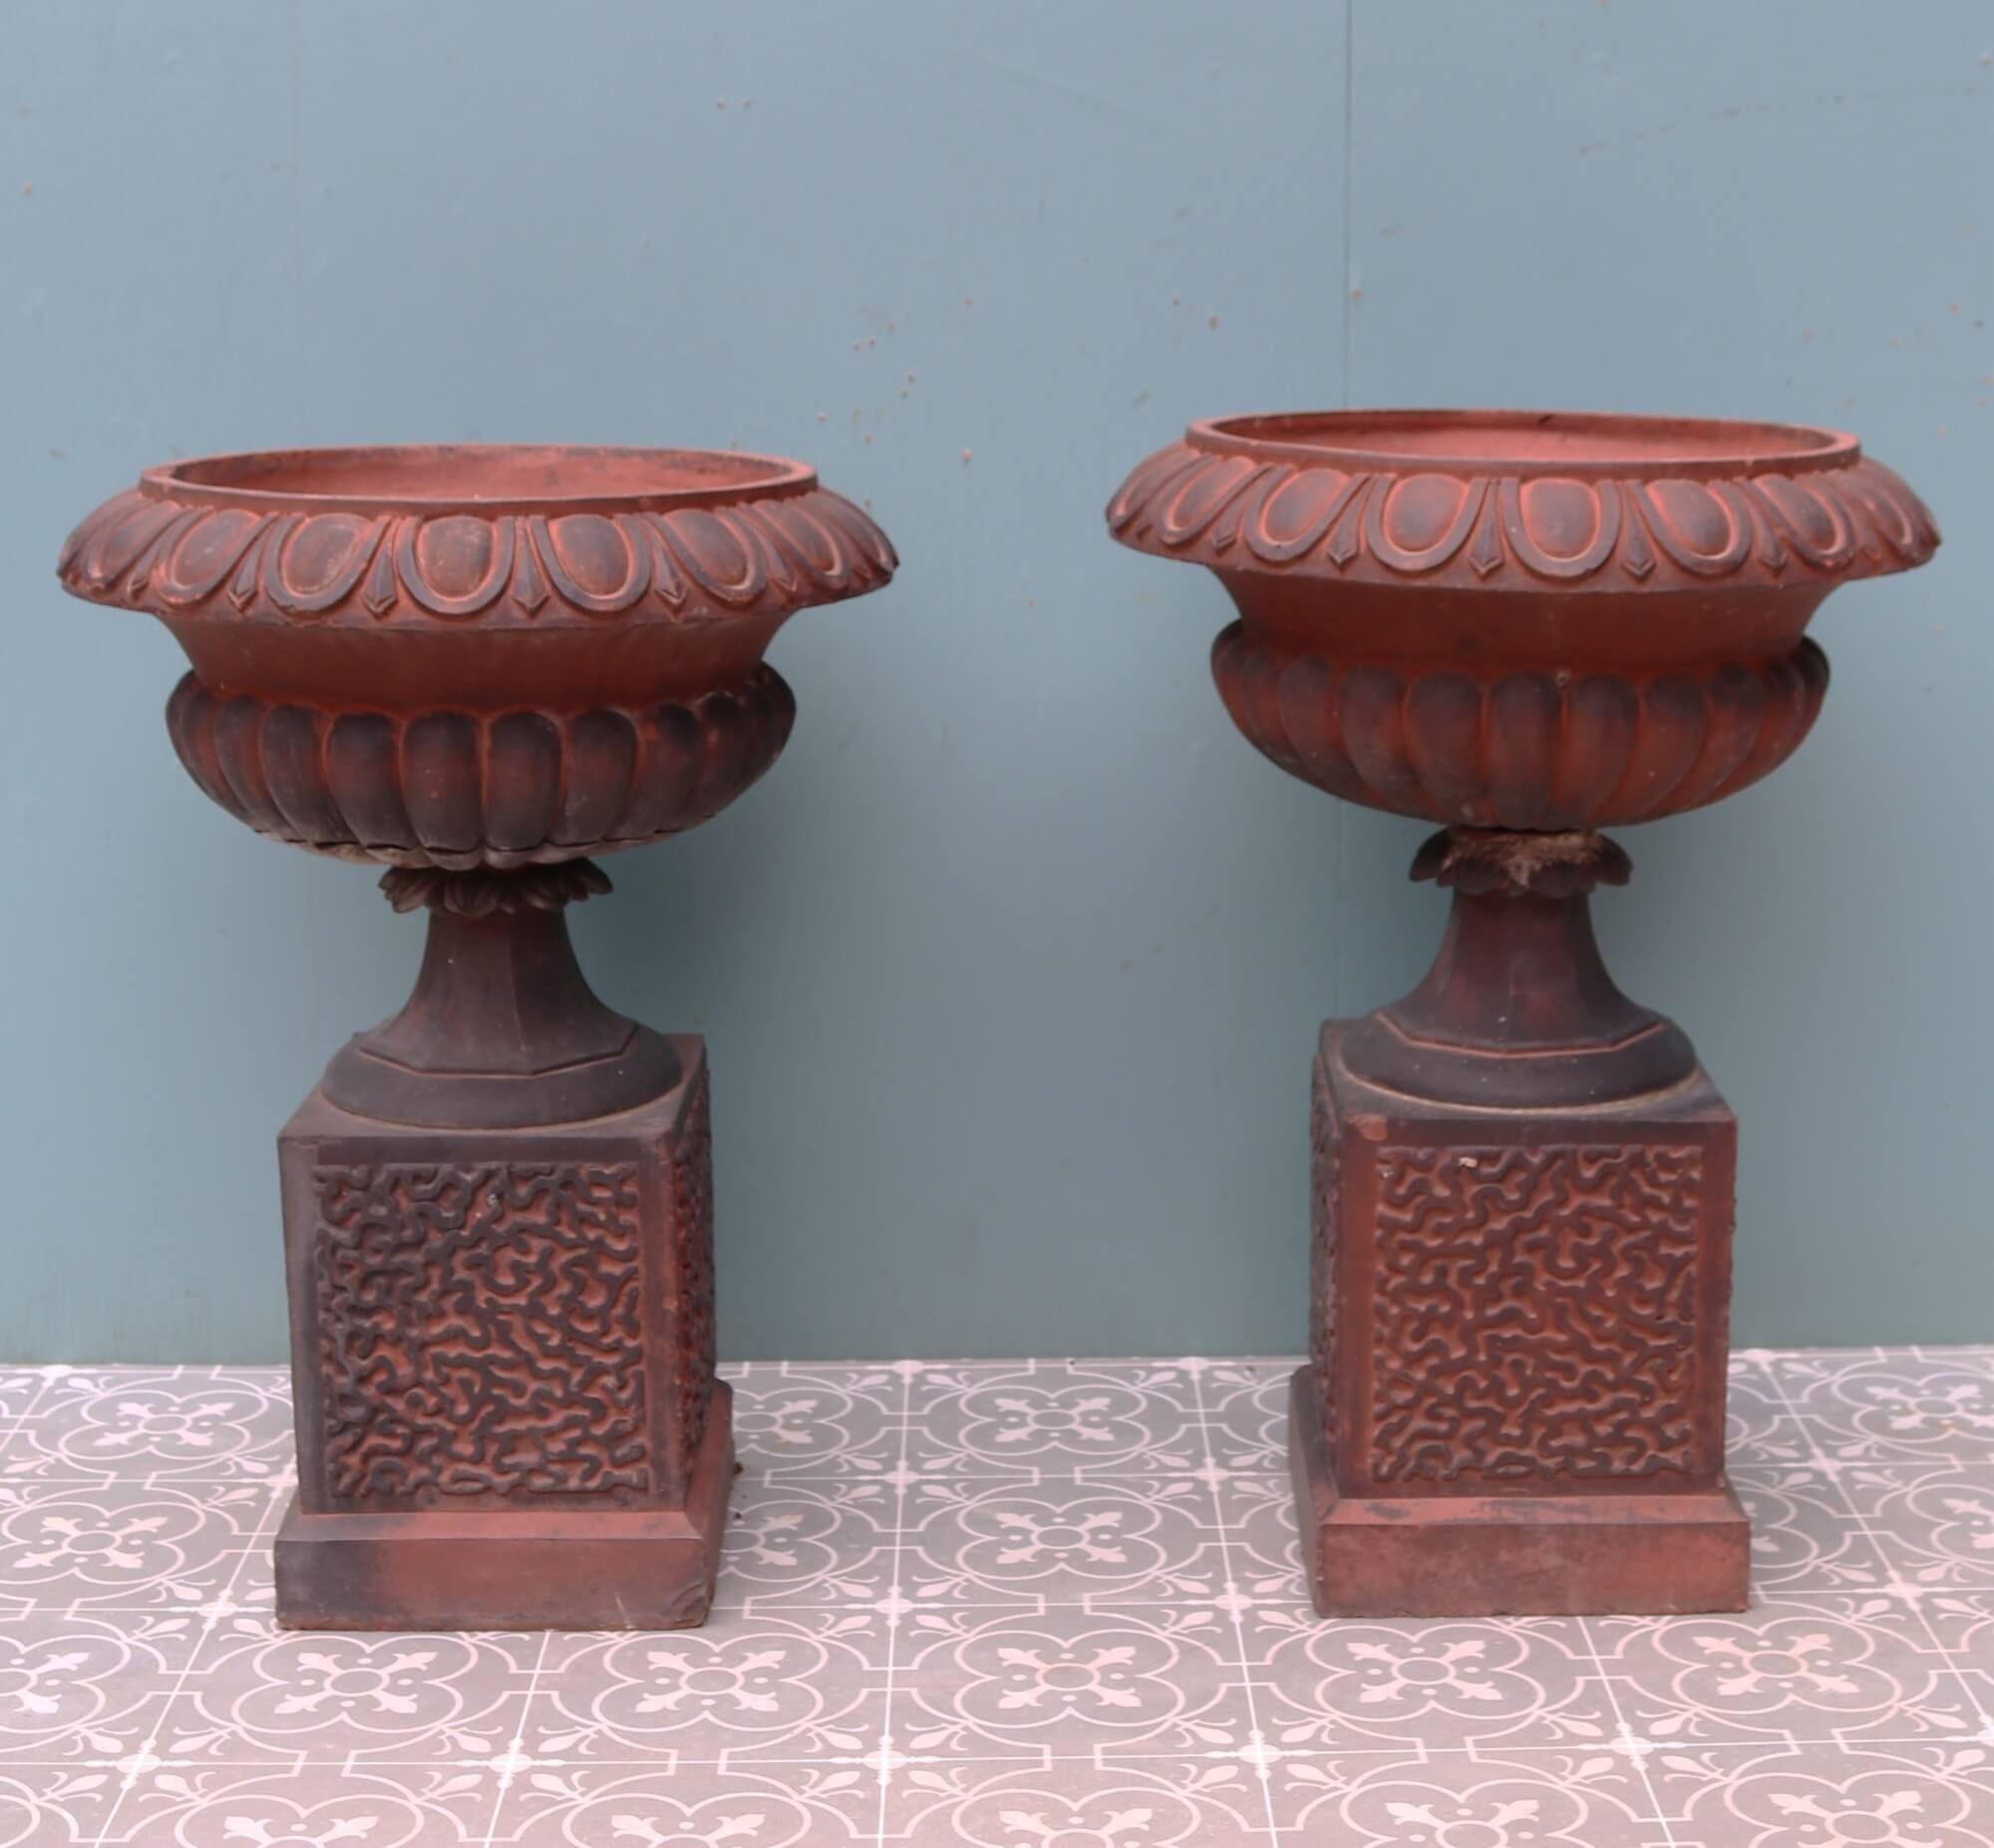 Dating from the late 19th century, this pair of terracotta garden urns are a beautiful addition to a country garden. They are made in red terracotta and have a dark patination in places that indicates their age. Each are intricately designed with